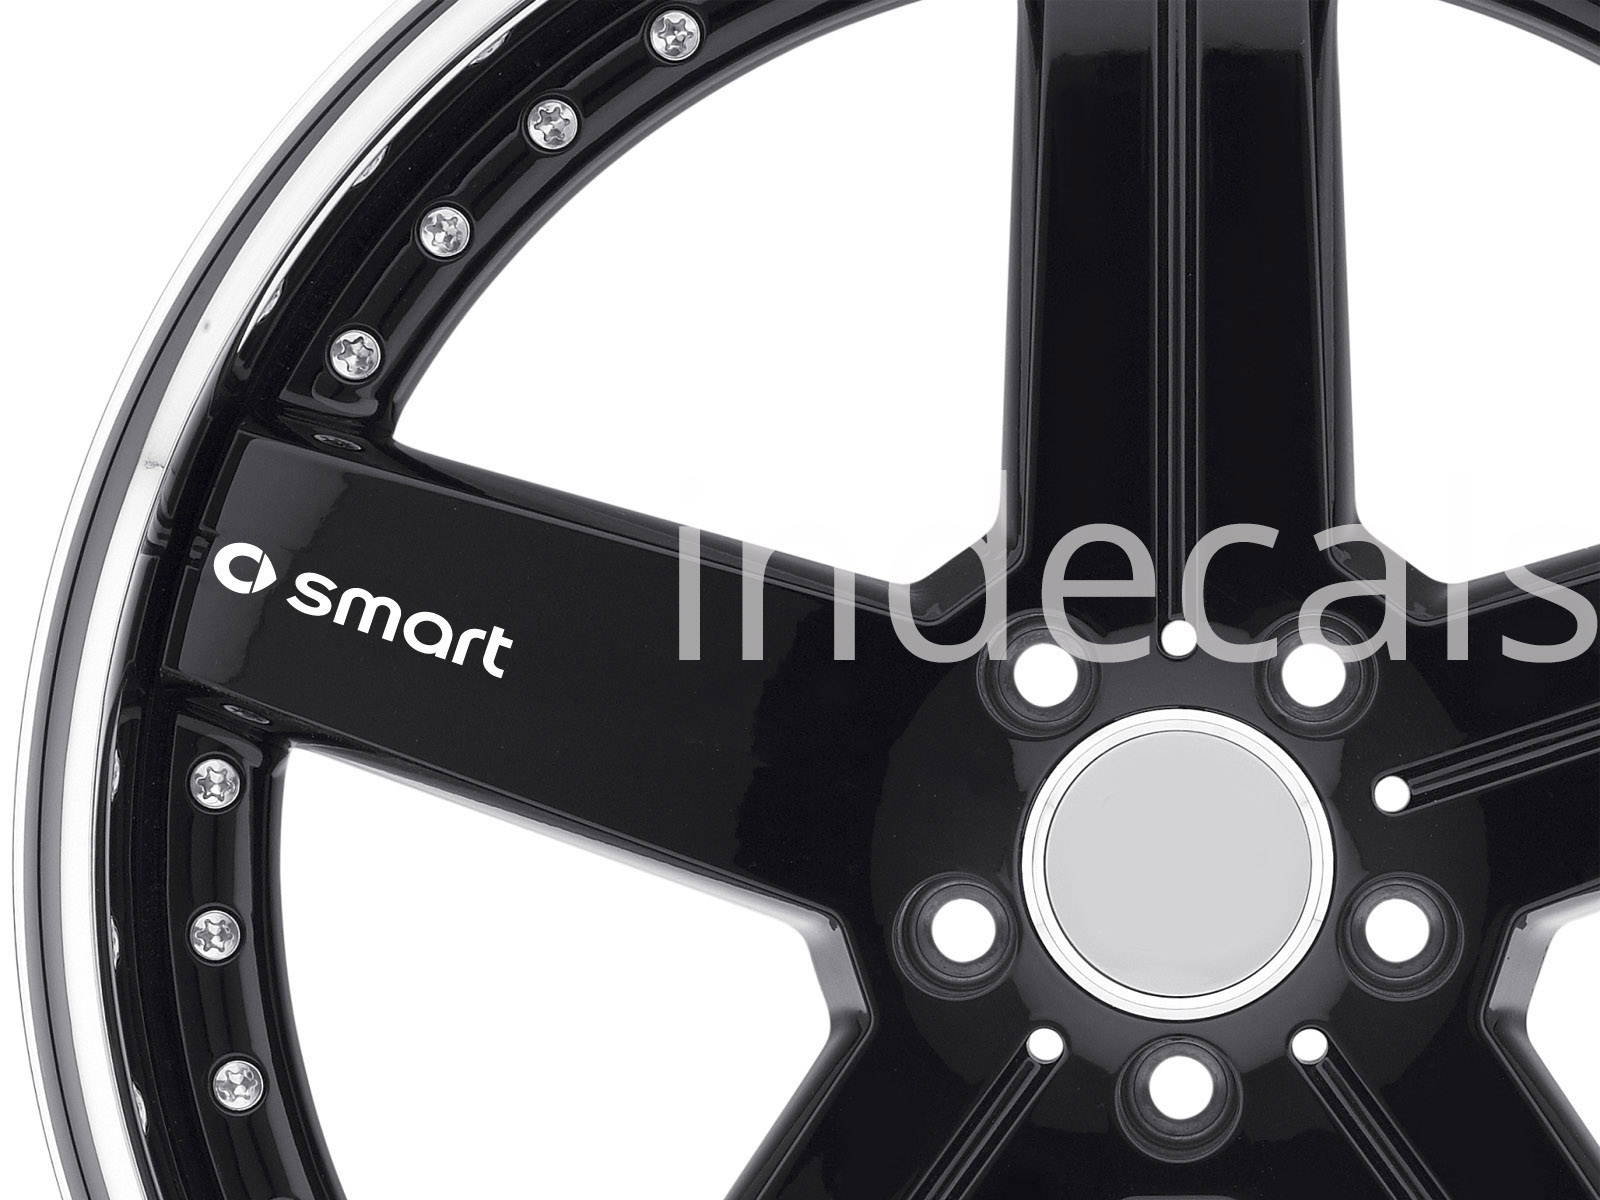 6 x Smart Stickers for Wheels - White